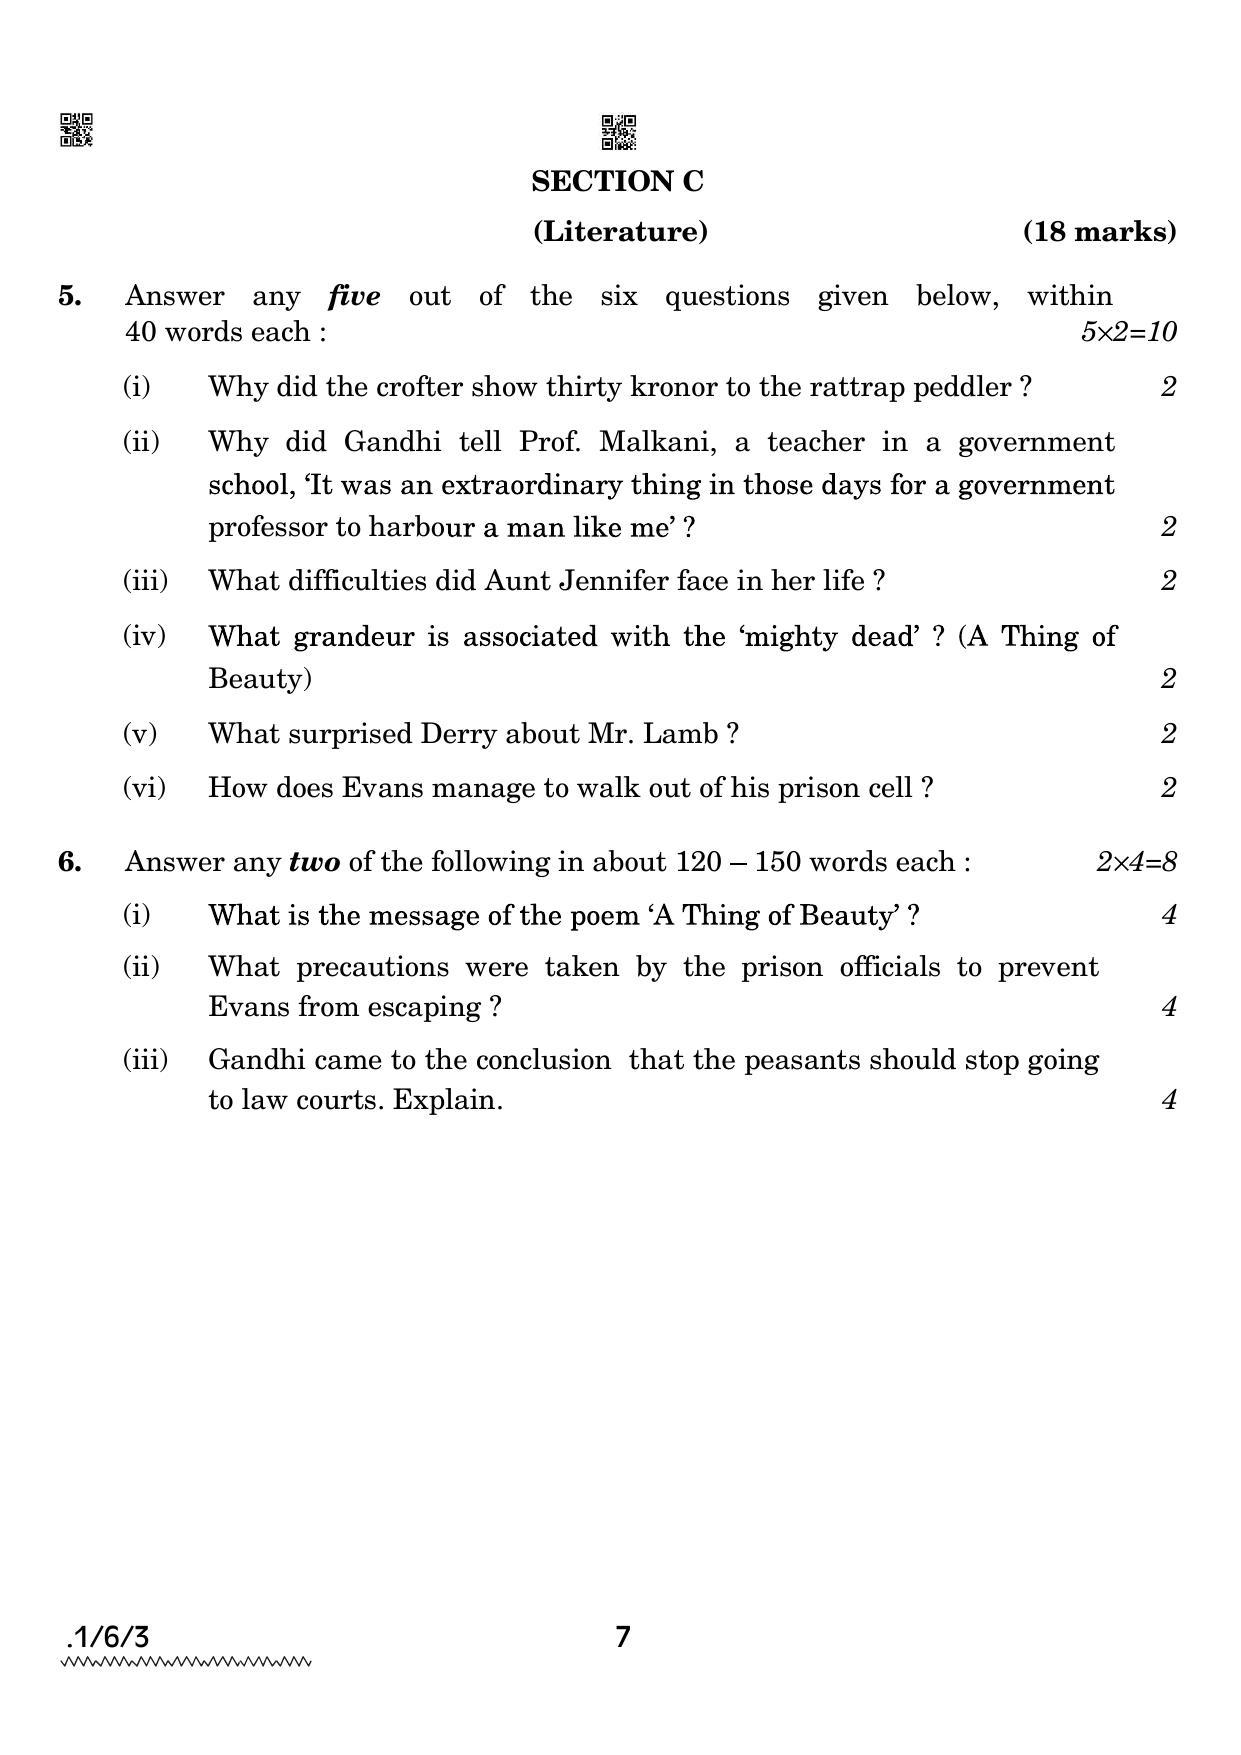 CBSE Class 12 1-6-3 ENGLISH CORE 2022 Compartment Question Paper - Page 7